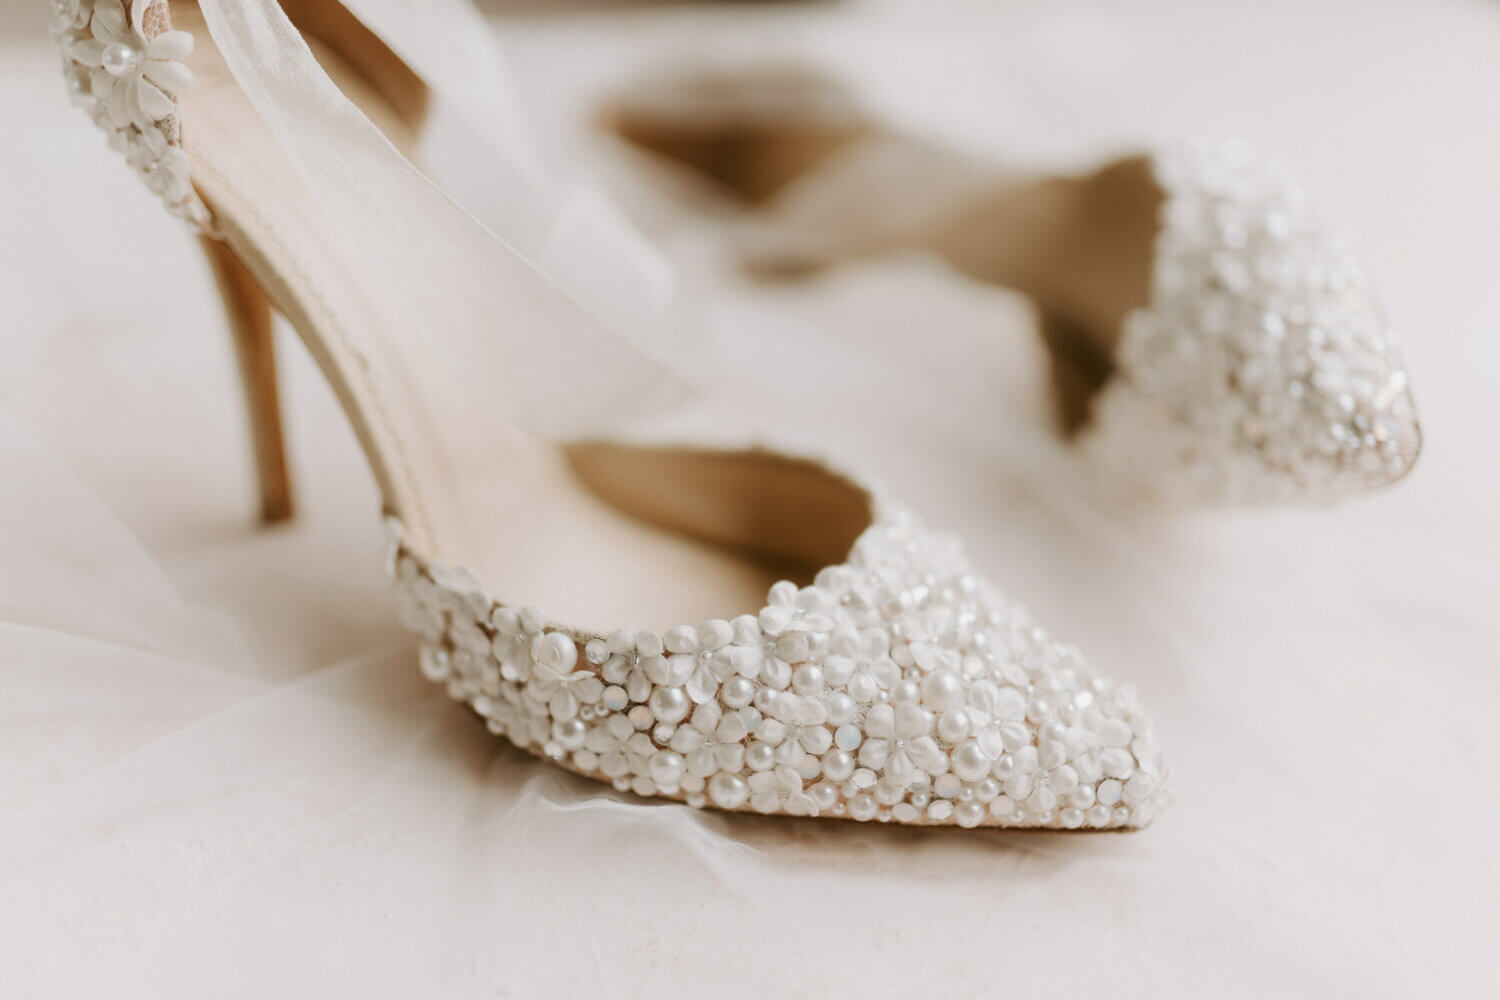 floral and pearl wedding shoes - 2 piece with organza ribbon ankle ties